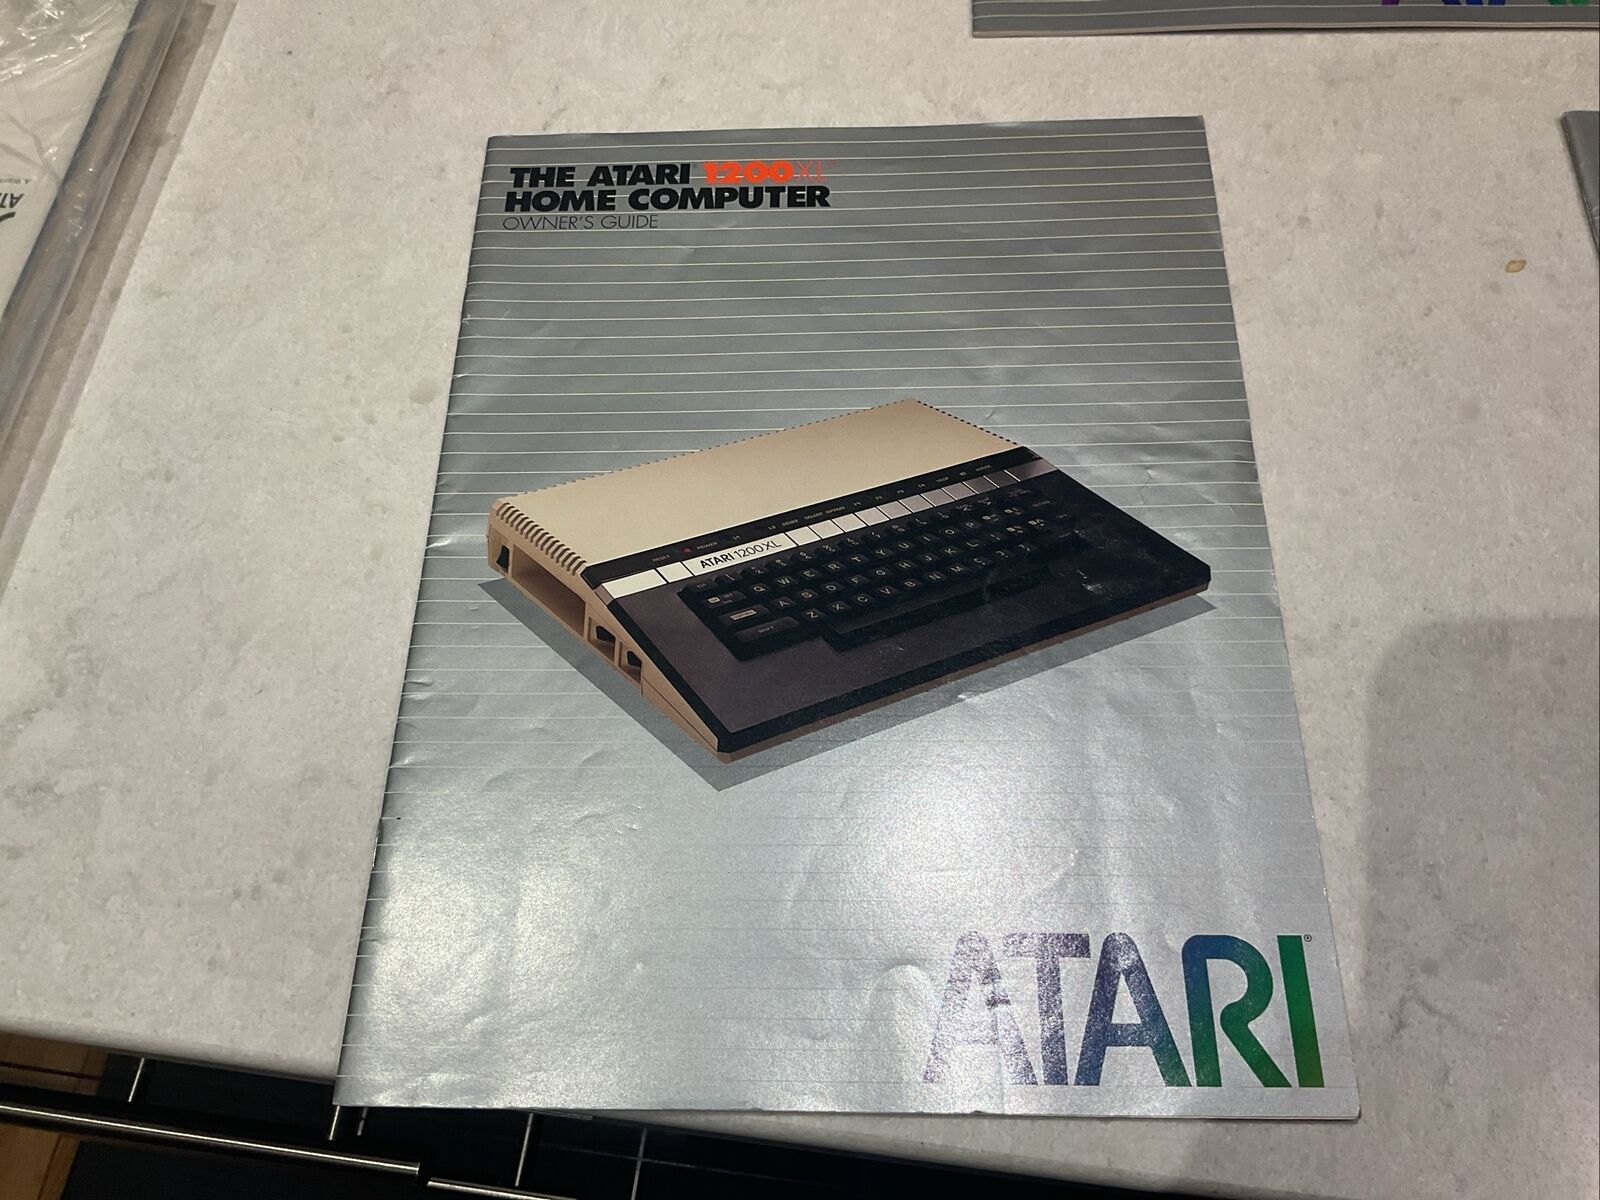 Vintage Atari Home Computer 1200XL Owner's Guide 1982